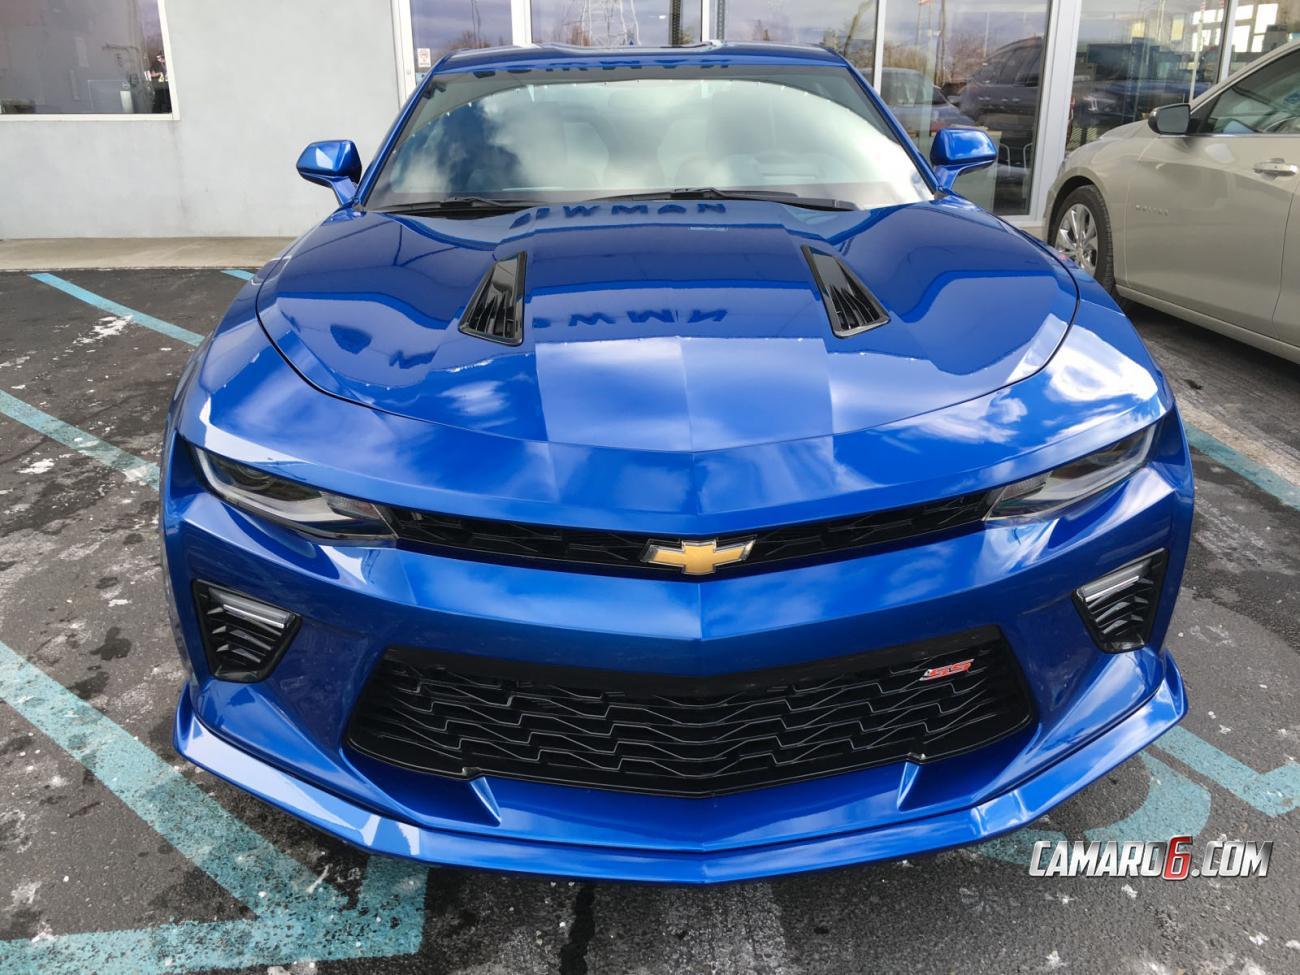 Check Out This 2016 Camaro SS In Hyper Blue Metallic With A Body Kit